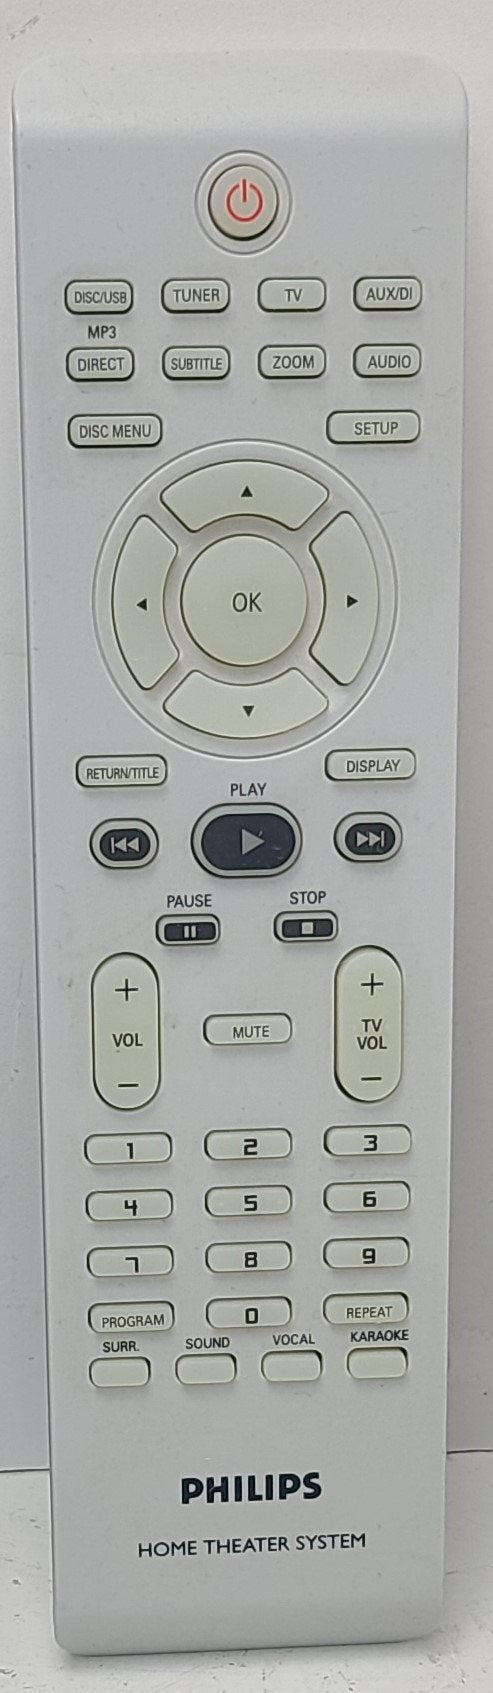 Philips 2422 5490 0902 Home Theater System Remote Control for Model HTS610-Remote-SpenCertified-refurbished-vintage-electonics